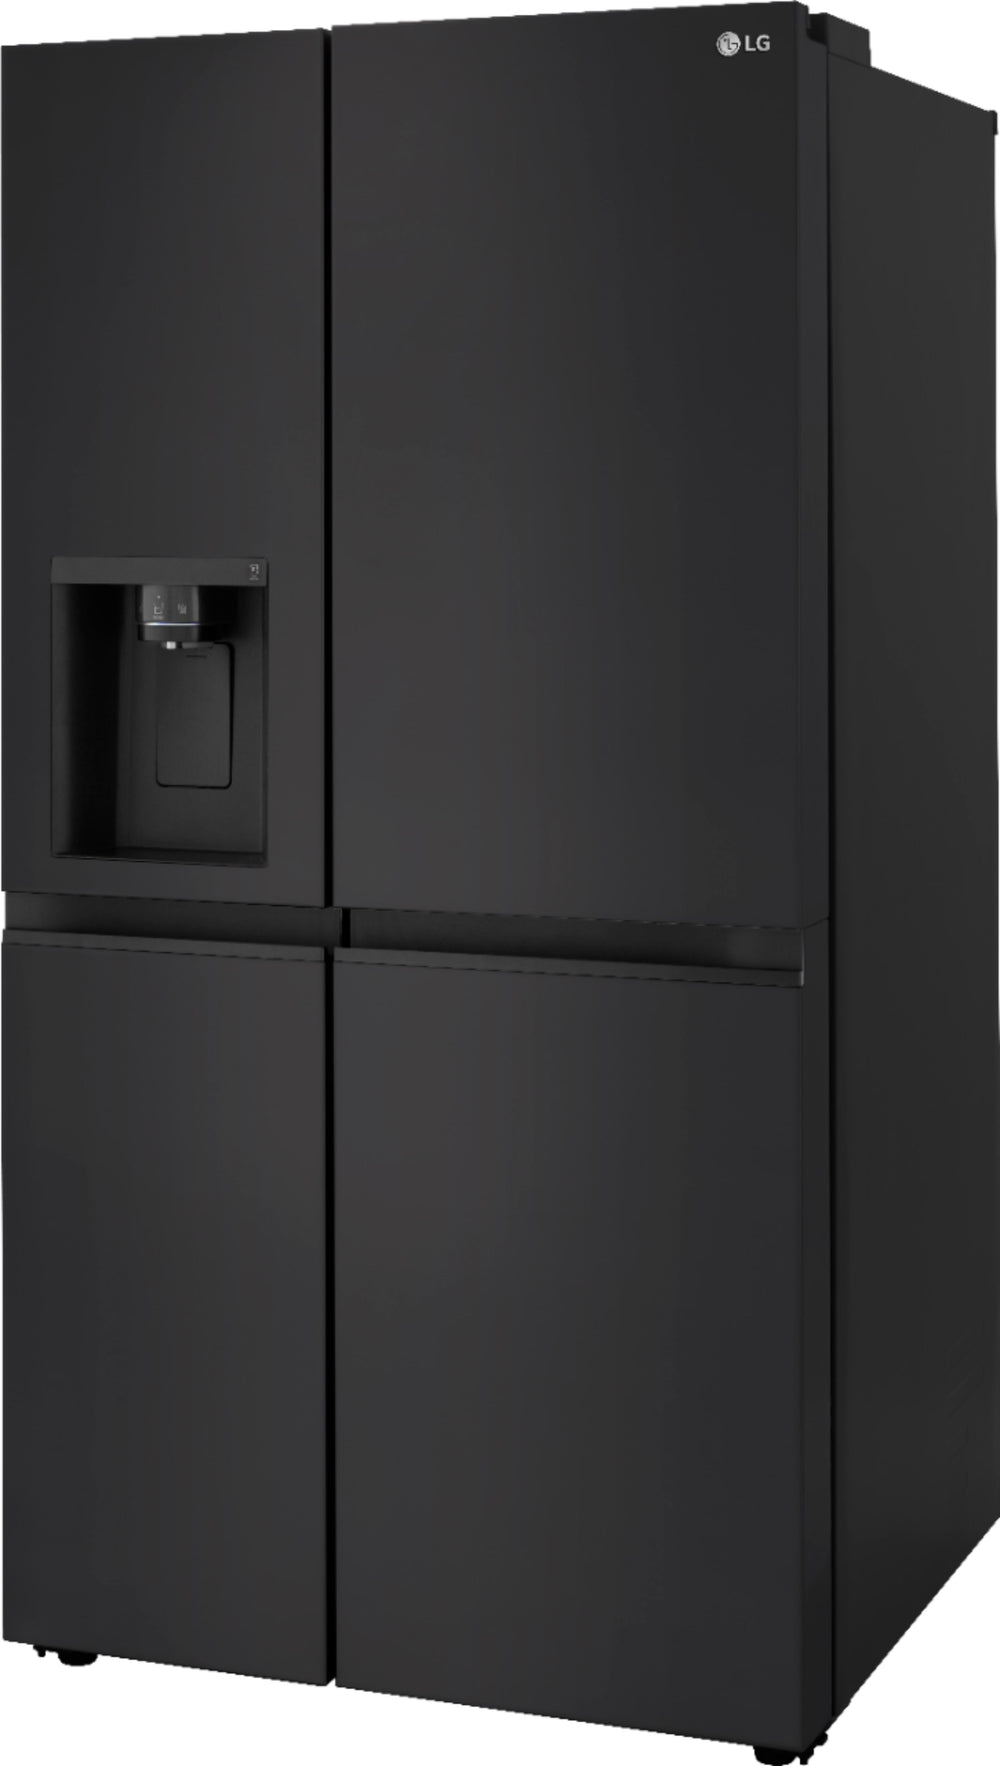 LG - 27.2 cu ft Side by Side Refrigerator with SpacePlus Ice - Smooth black_1